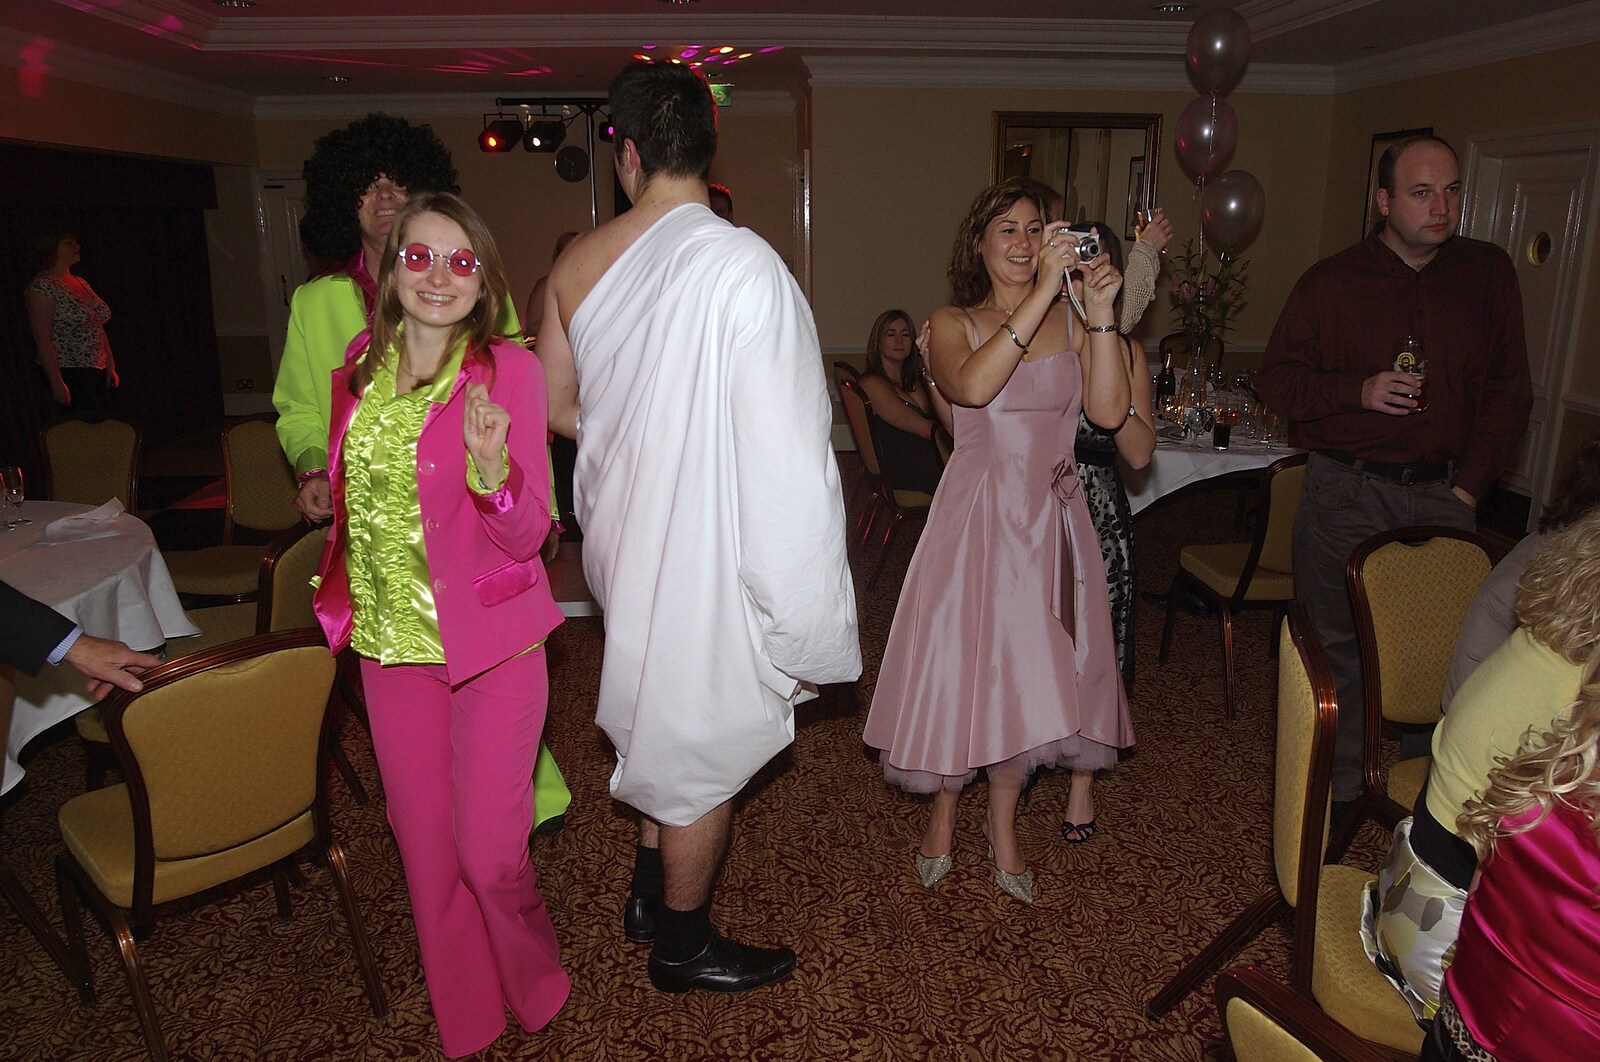 Matt's Wedding Reception, and a BSCC Presentation, Brome, Solihull and Stratford upon Avon - 6th October 2007: A bright pink jump suit